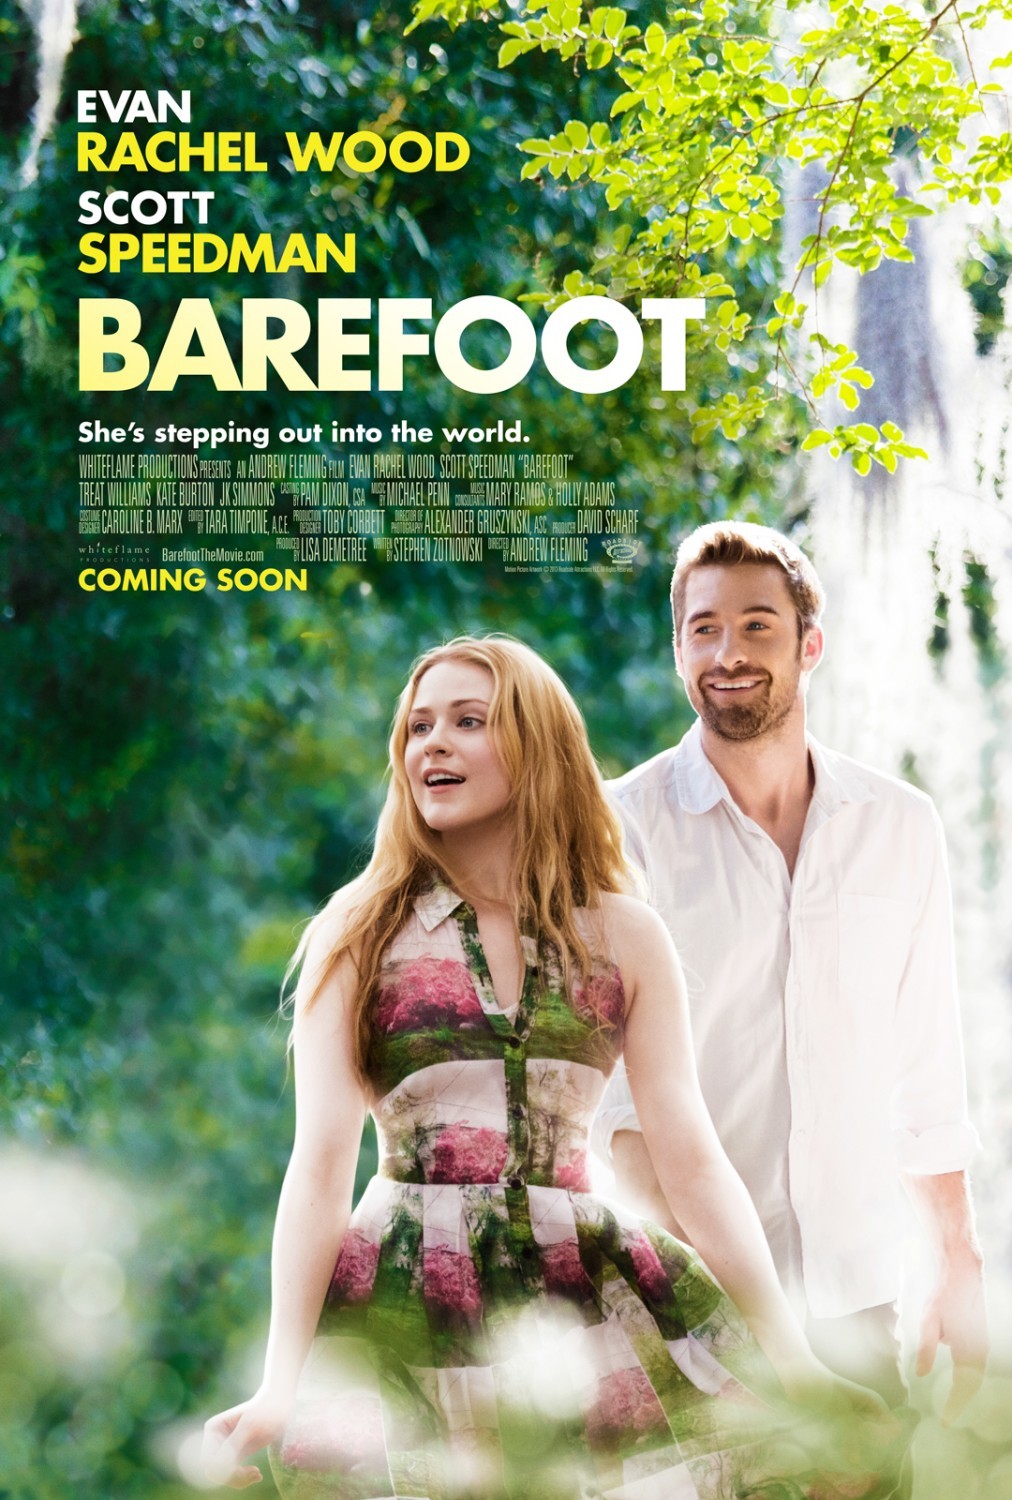 Poster of Roadside Attractions' Barefoot (2014)